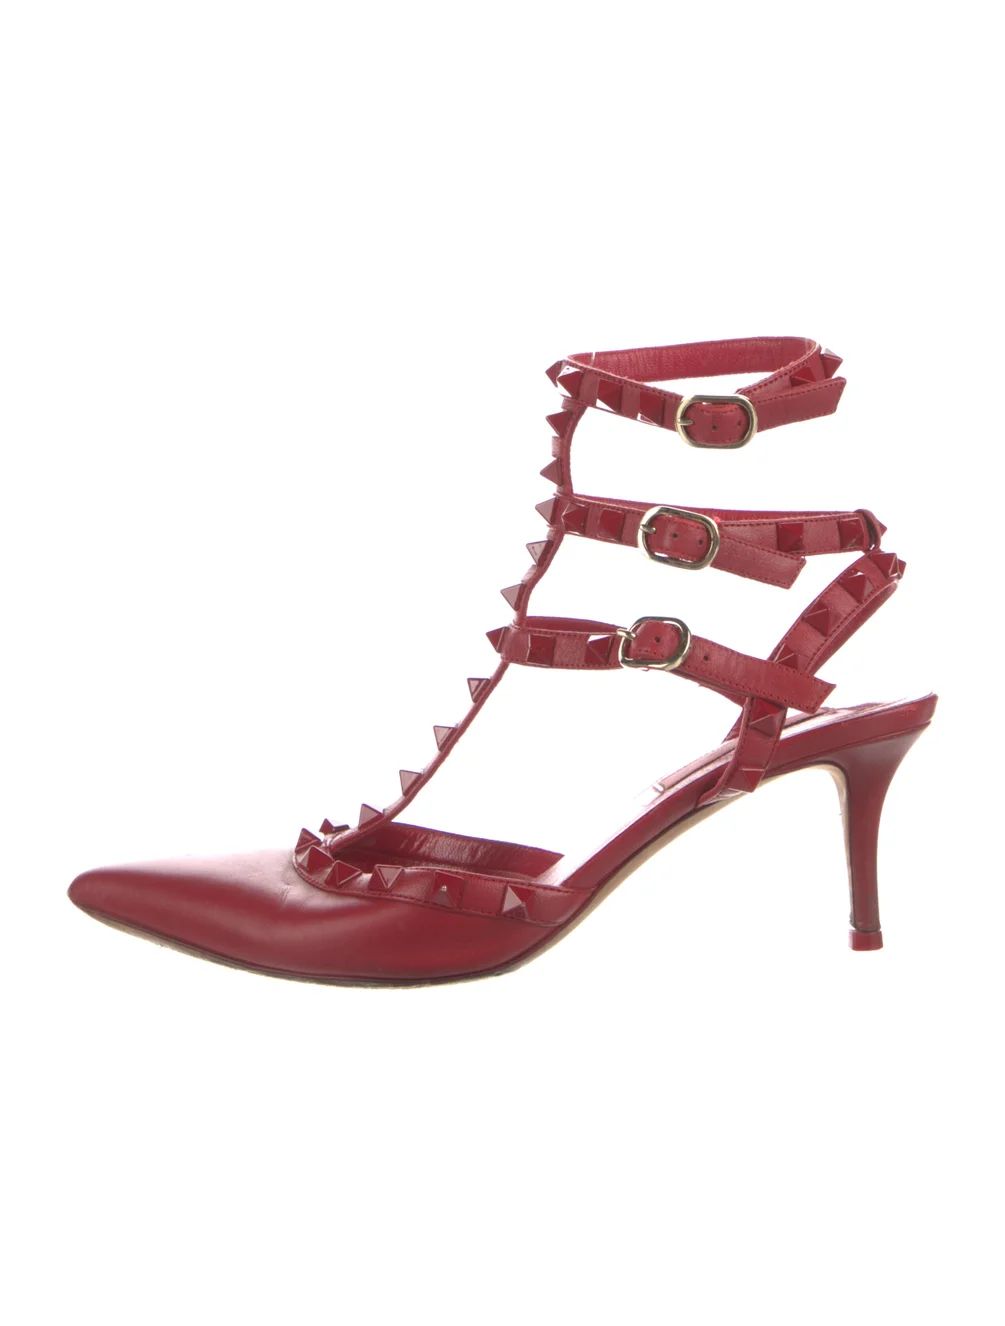 Rockstud Accents Leather T-Strap Pumps | The RealReal